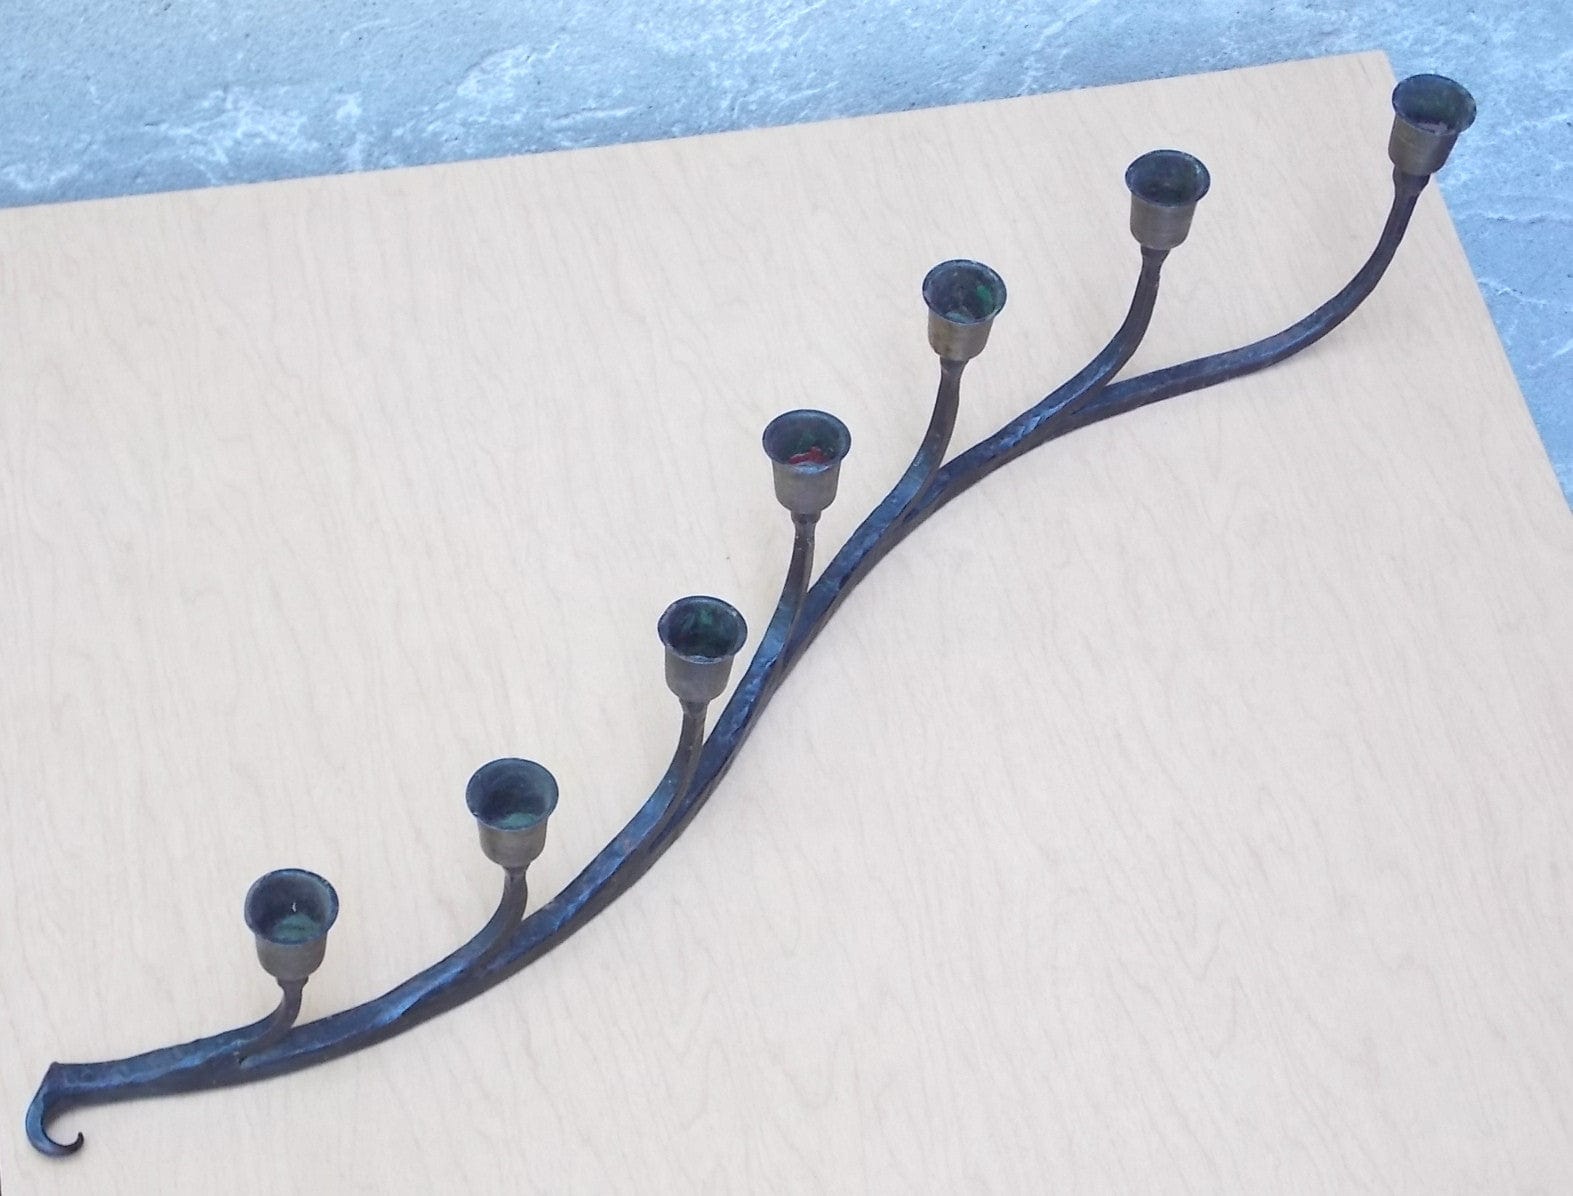 I Like Mike's Mid-Century Modern Accessories Black Hand Forged Wrought Iron 7 Candle Holder - Rustic Centerpiece